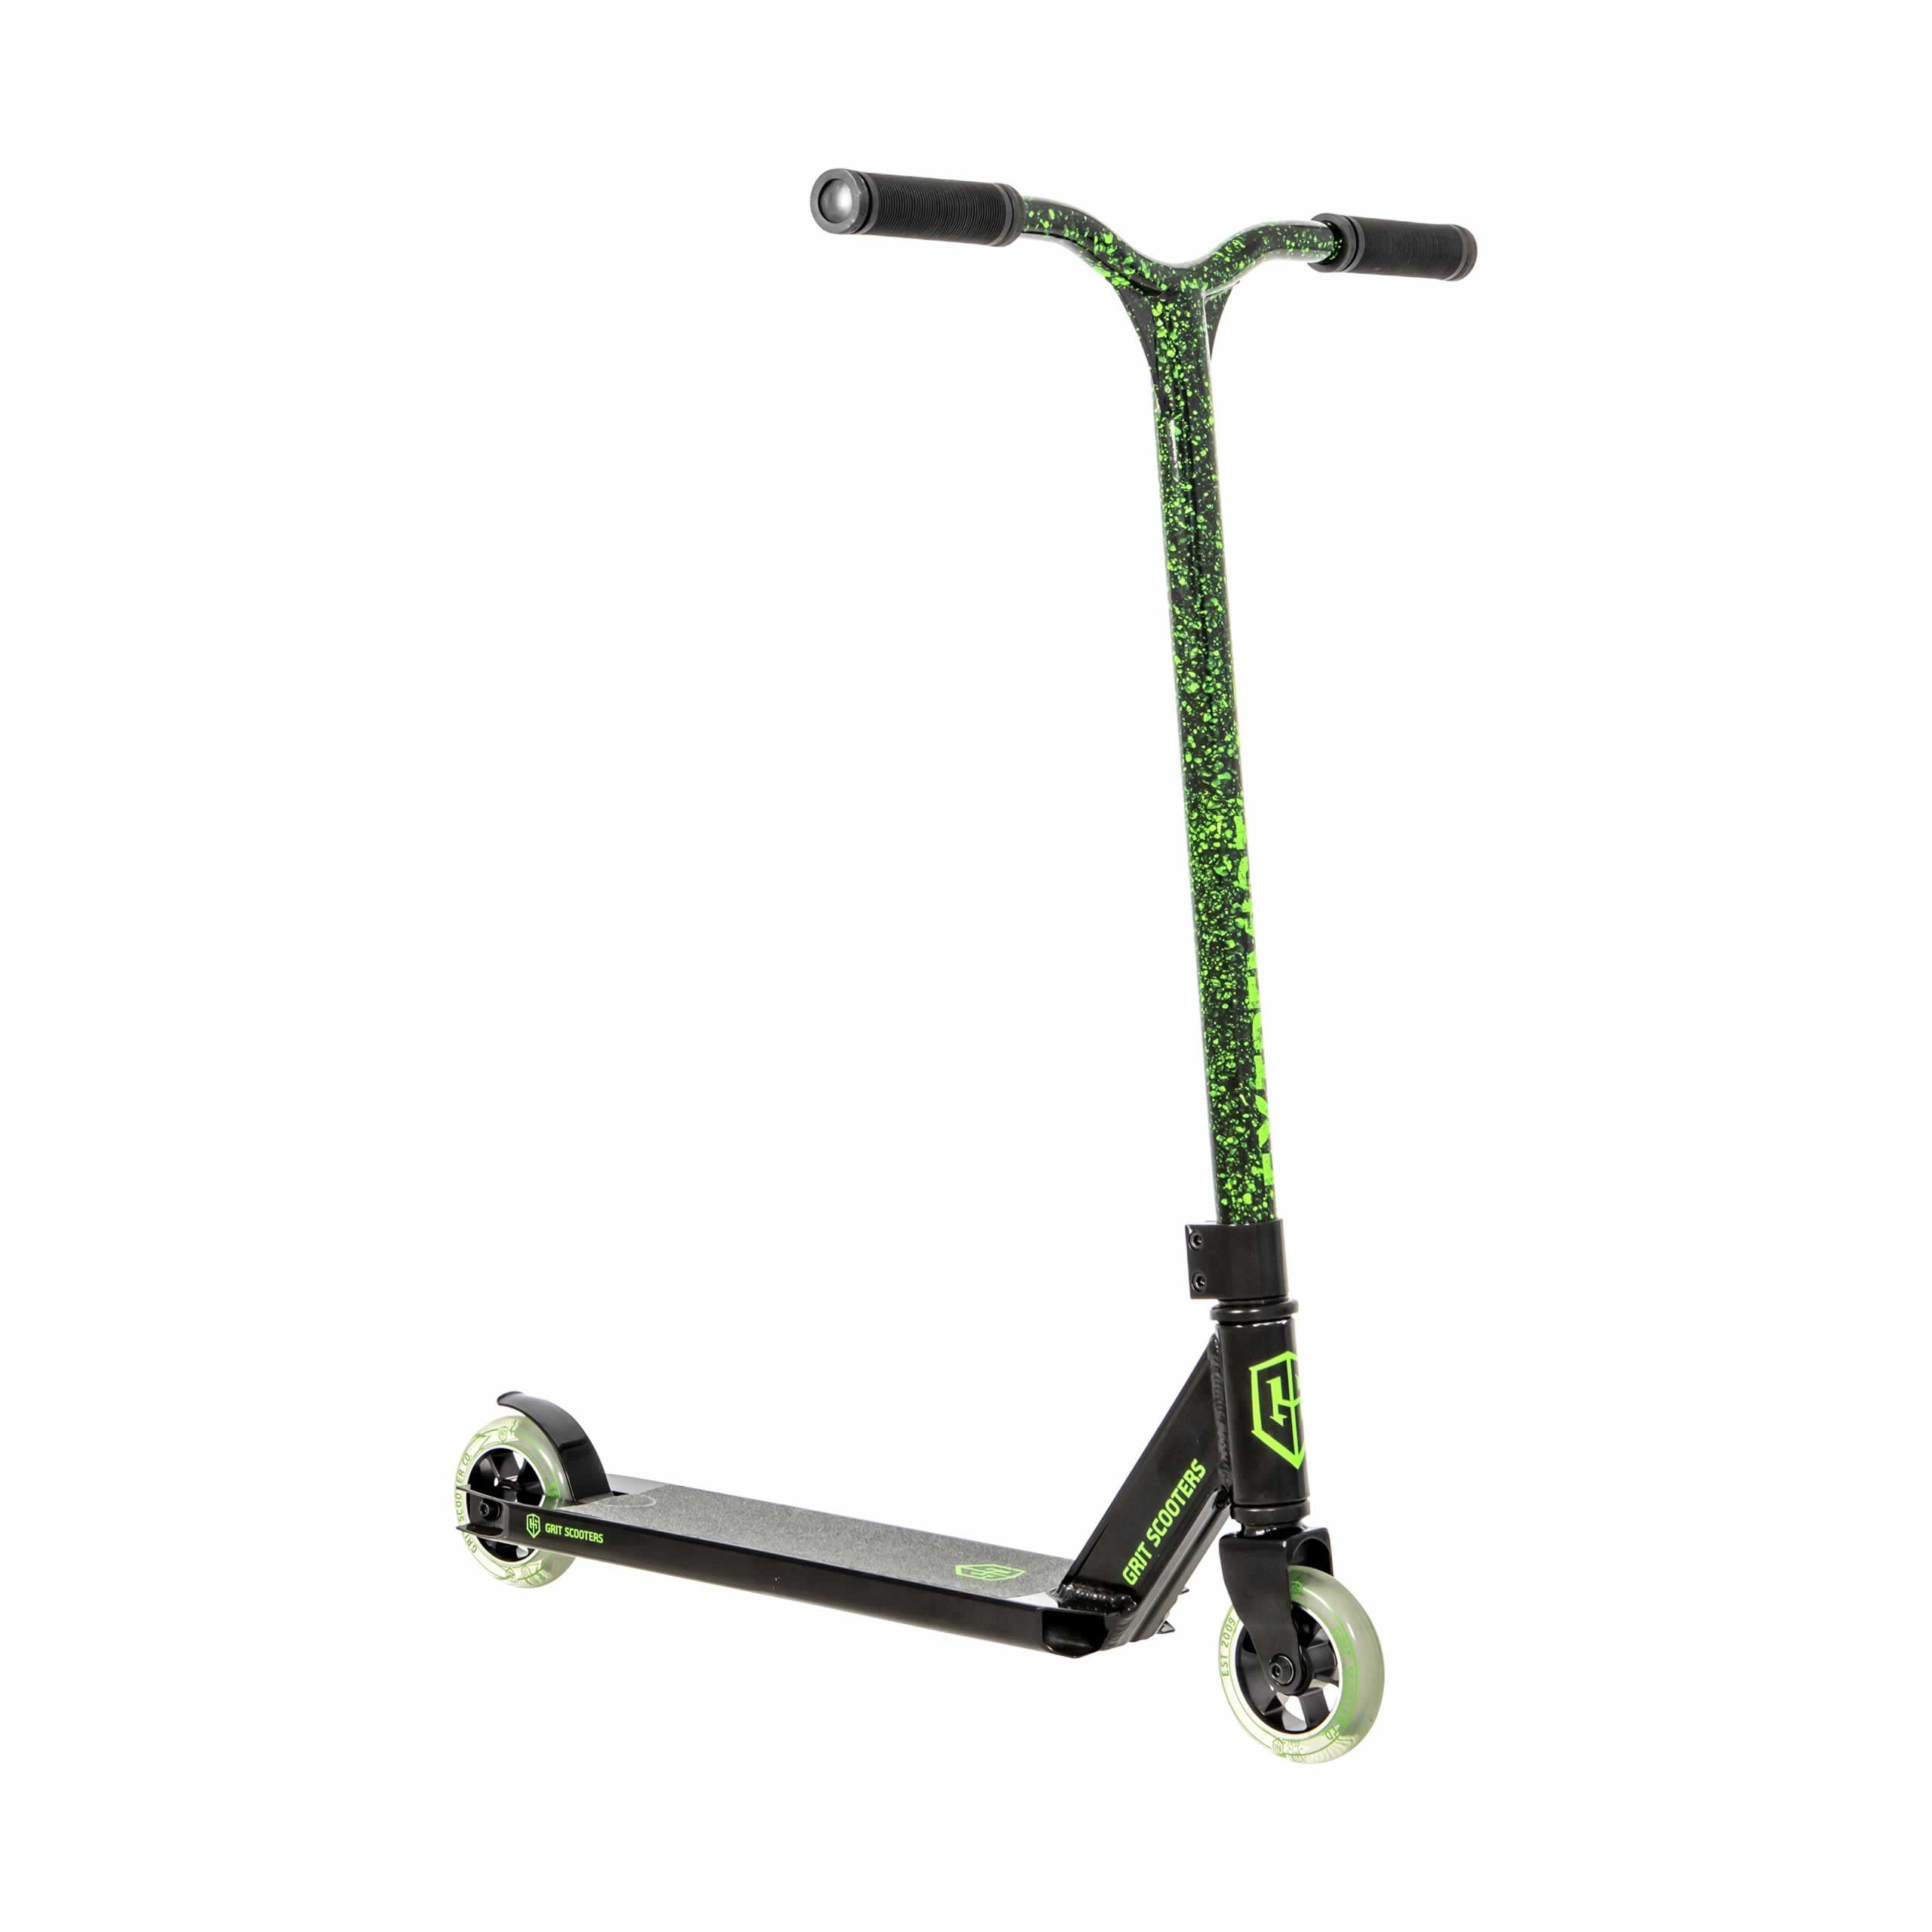 Grit Extremist 2021 Scooter - Black/Marble Green